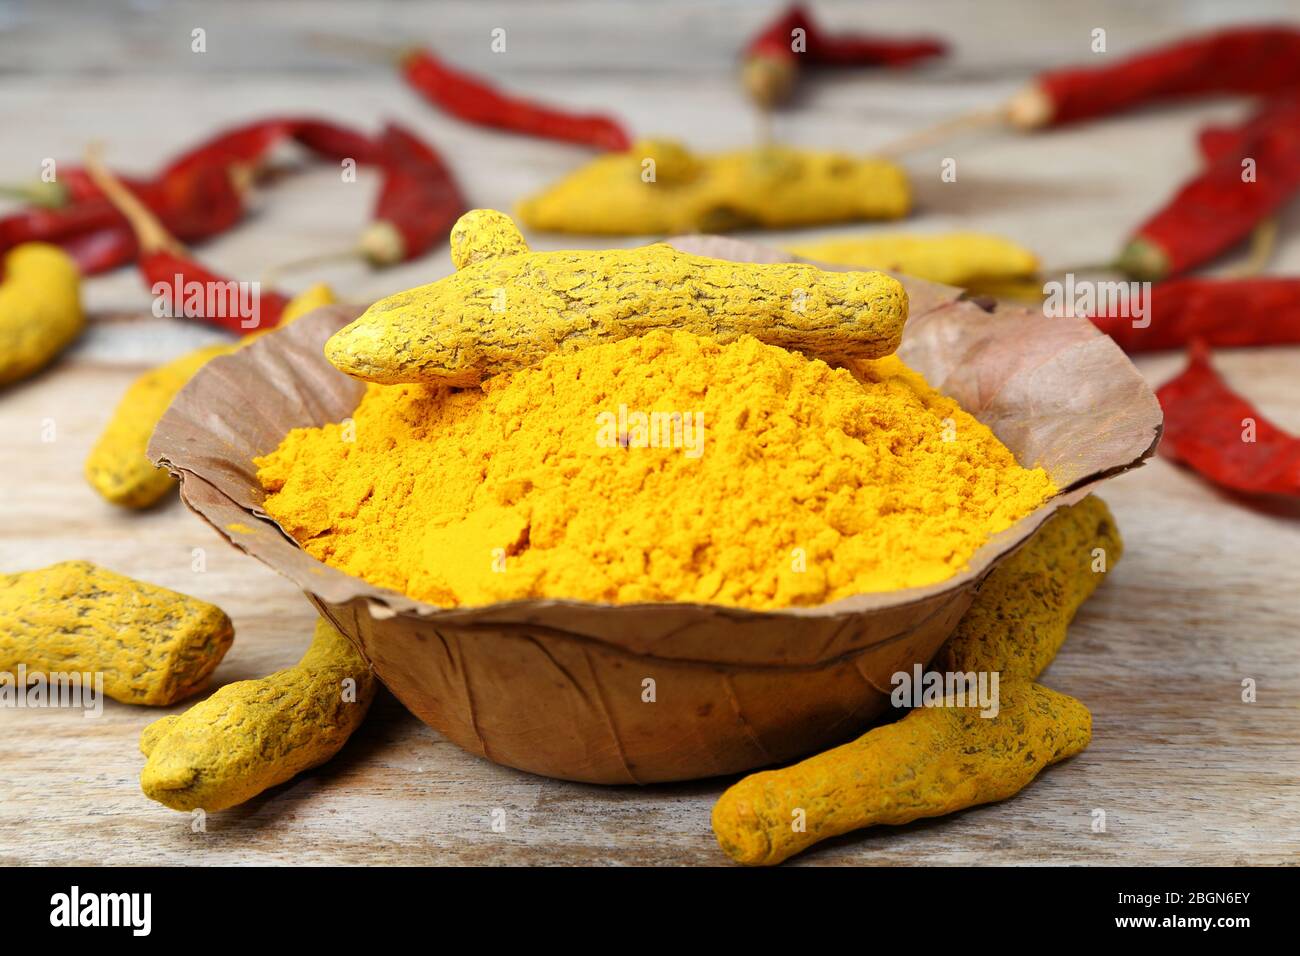 Indian style spices and herbs. Yellow turmeric powder in a handmade dry leaves bowl. Stock Photo